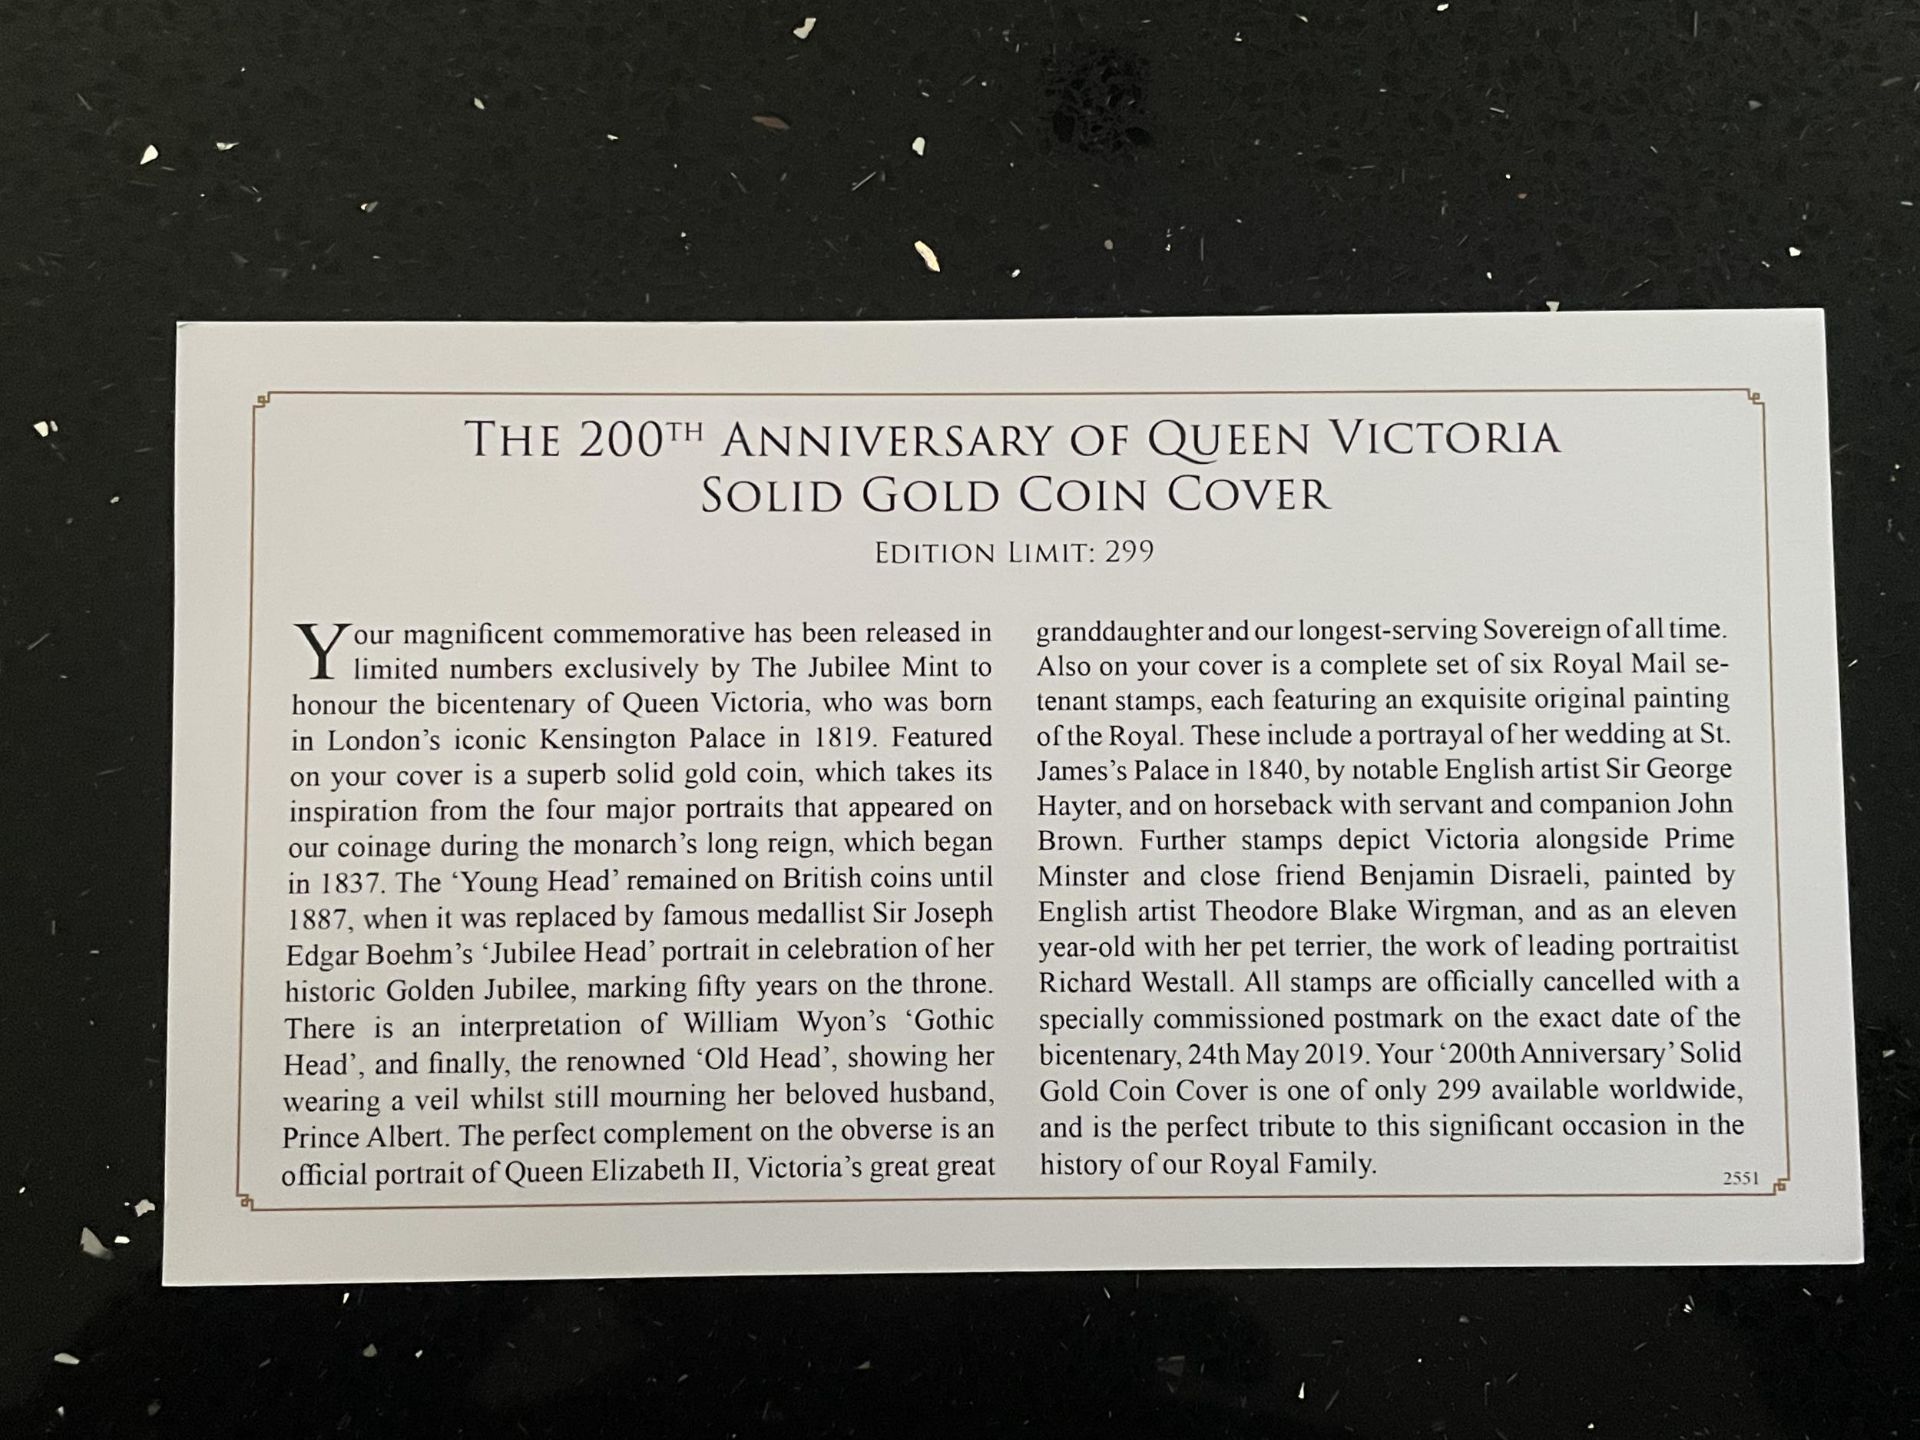 A 200TH ANNIVERSARY OF QUEEN VICTORIA 9 CARAT GOLD COMMEMORATIVE COIN COVER - LIMITED EDITION OF 299 - Image 4 of 4